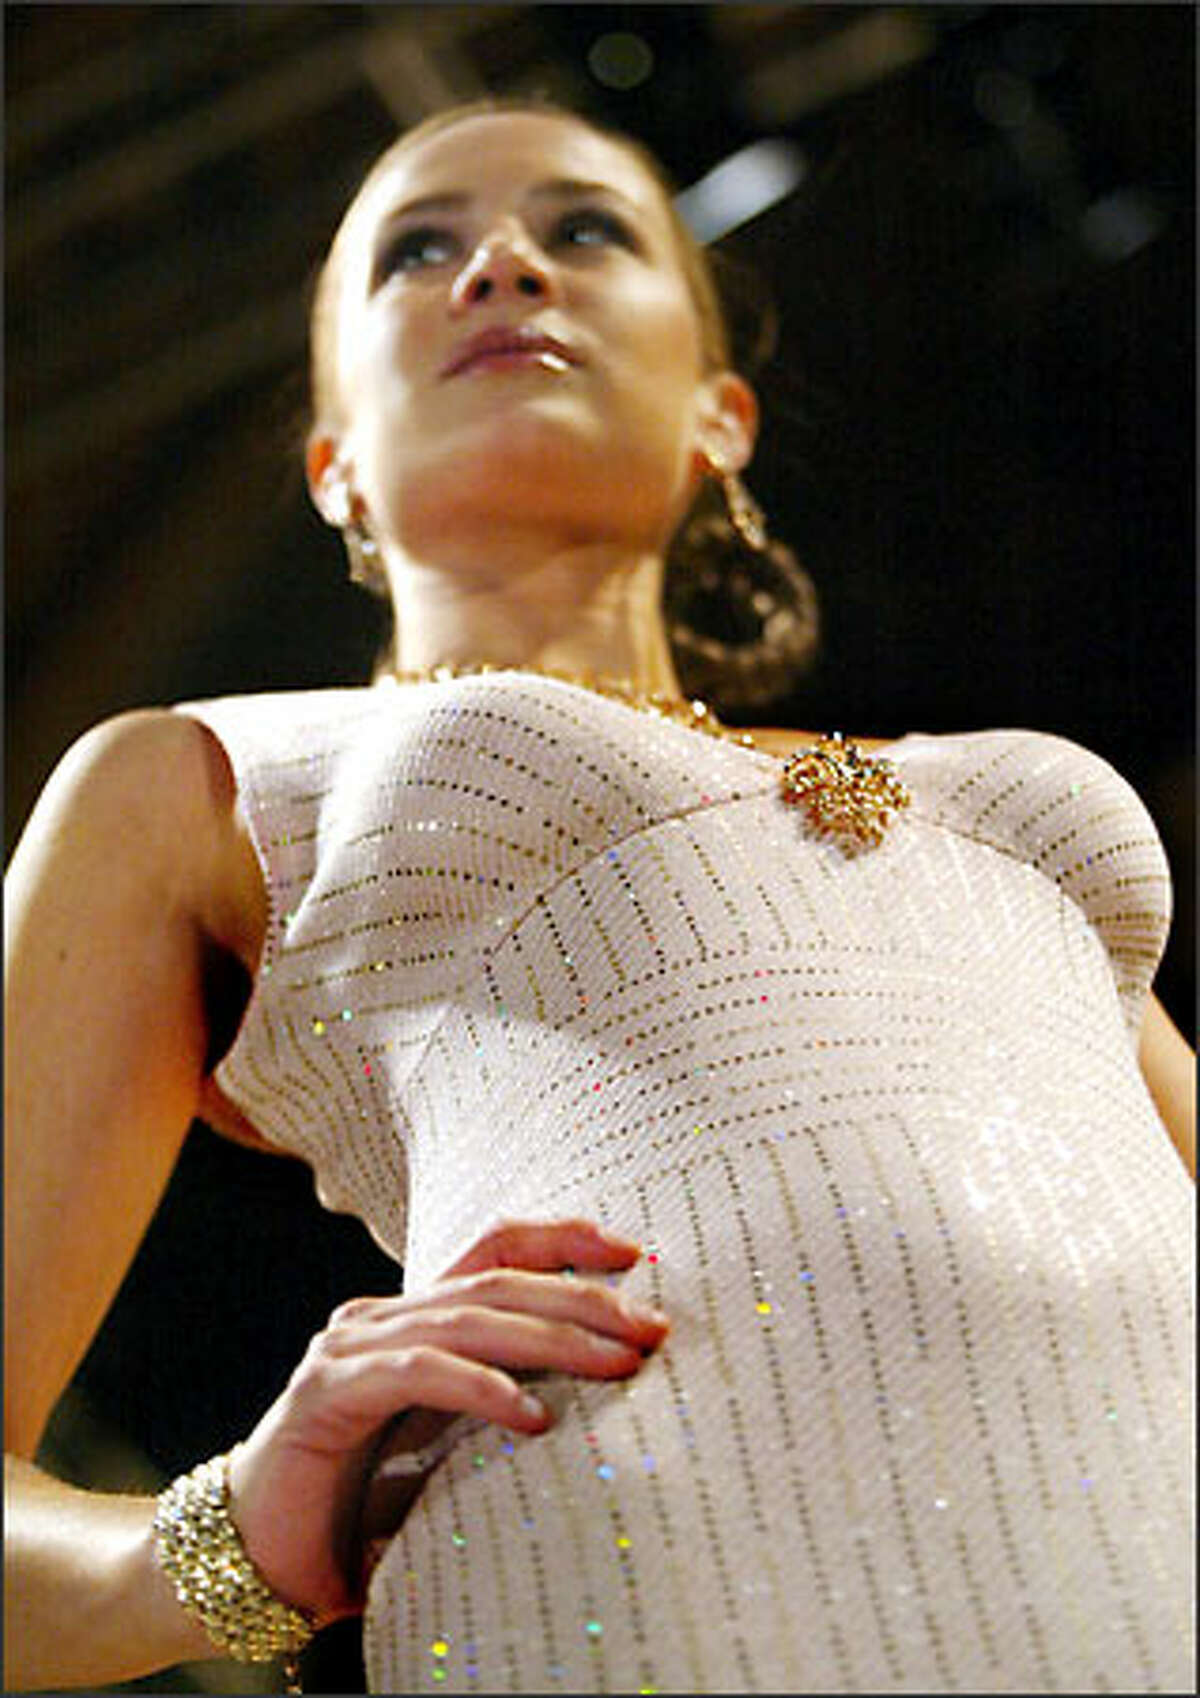 Knits that glitter were a major message at the spring fashion show Nordstrom and St. John Knits presented this week.